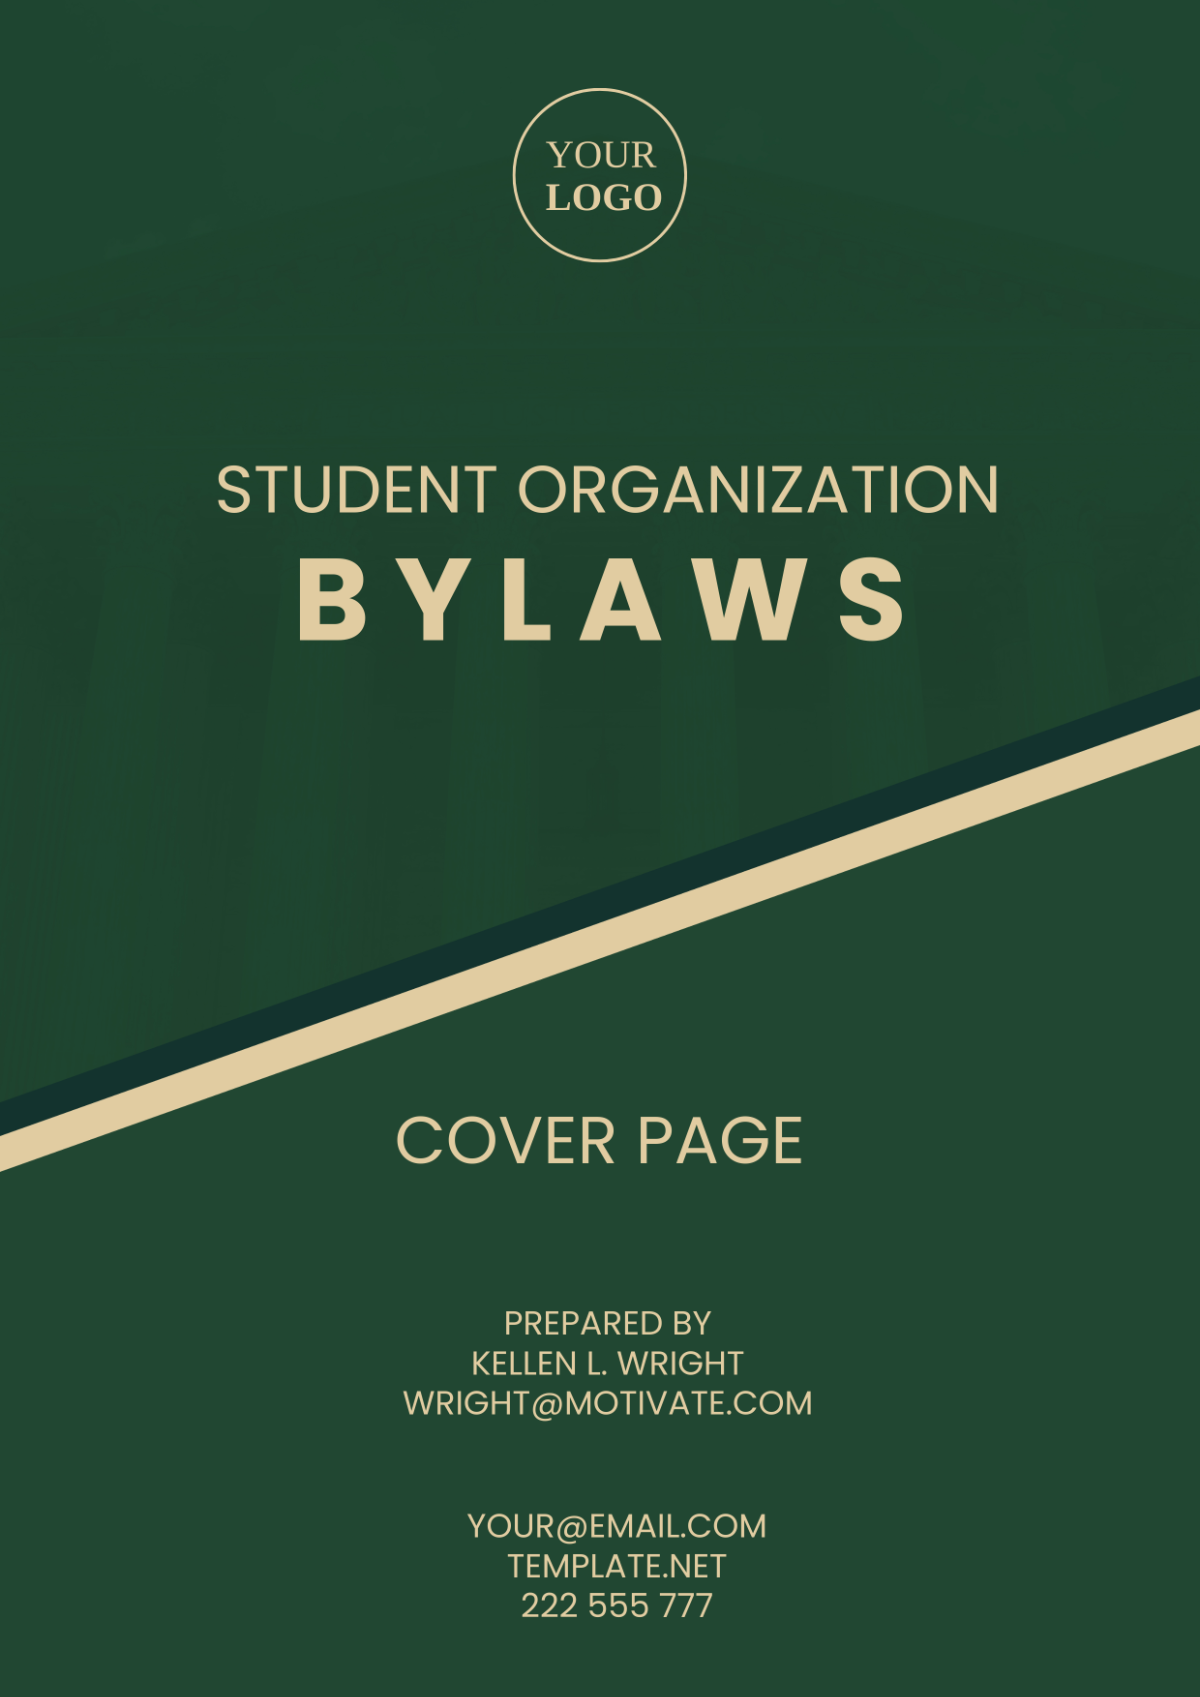 Student Organization Bylaws Cover Page Template